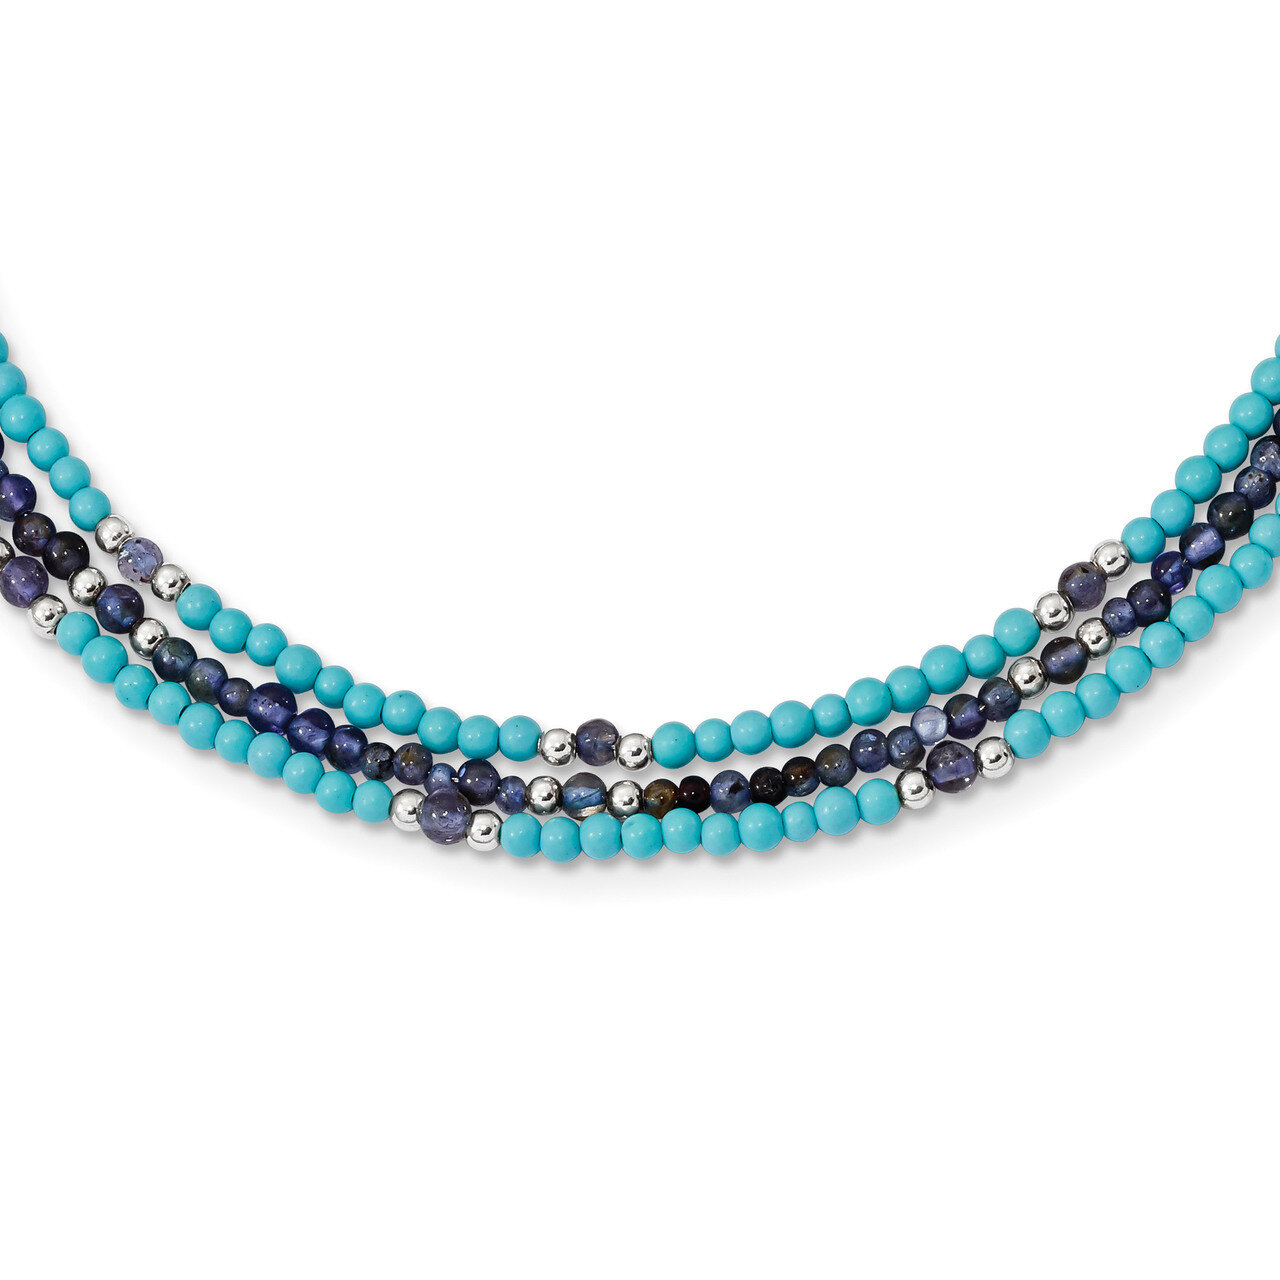 Iolite Lapis Quartz Recon. Turquoise 3-Strand with 2 inch Extender Necklace 18 Inch Sterling Silver QH5437-18